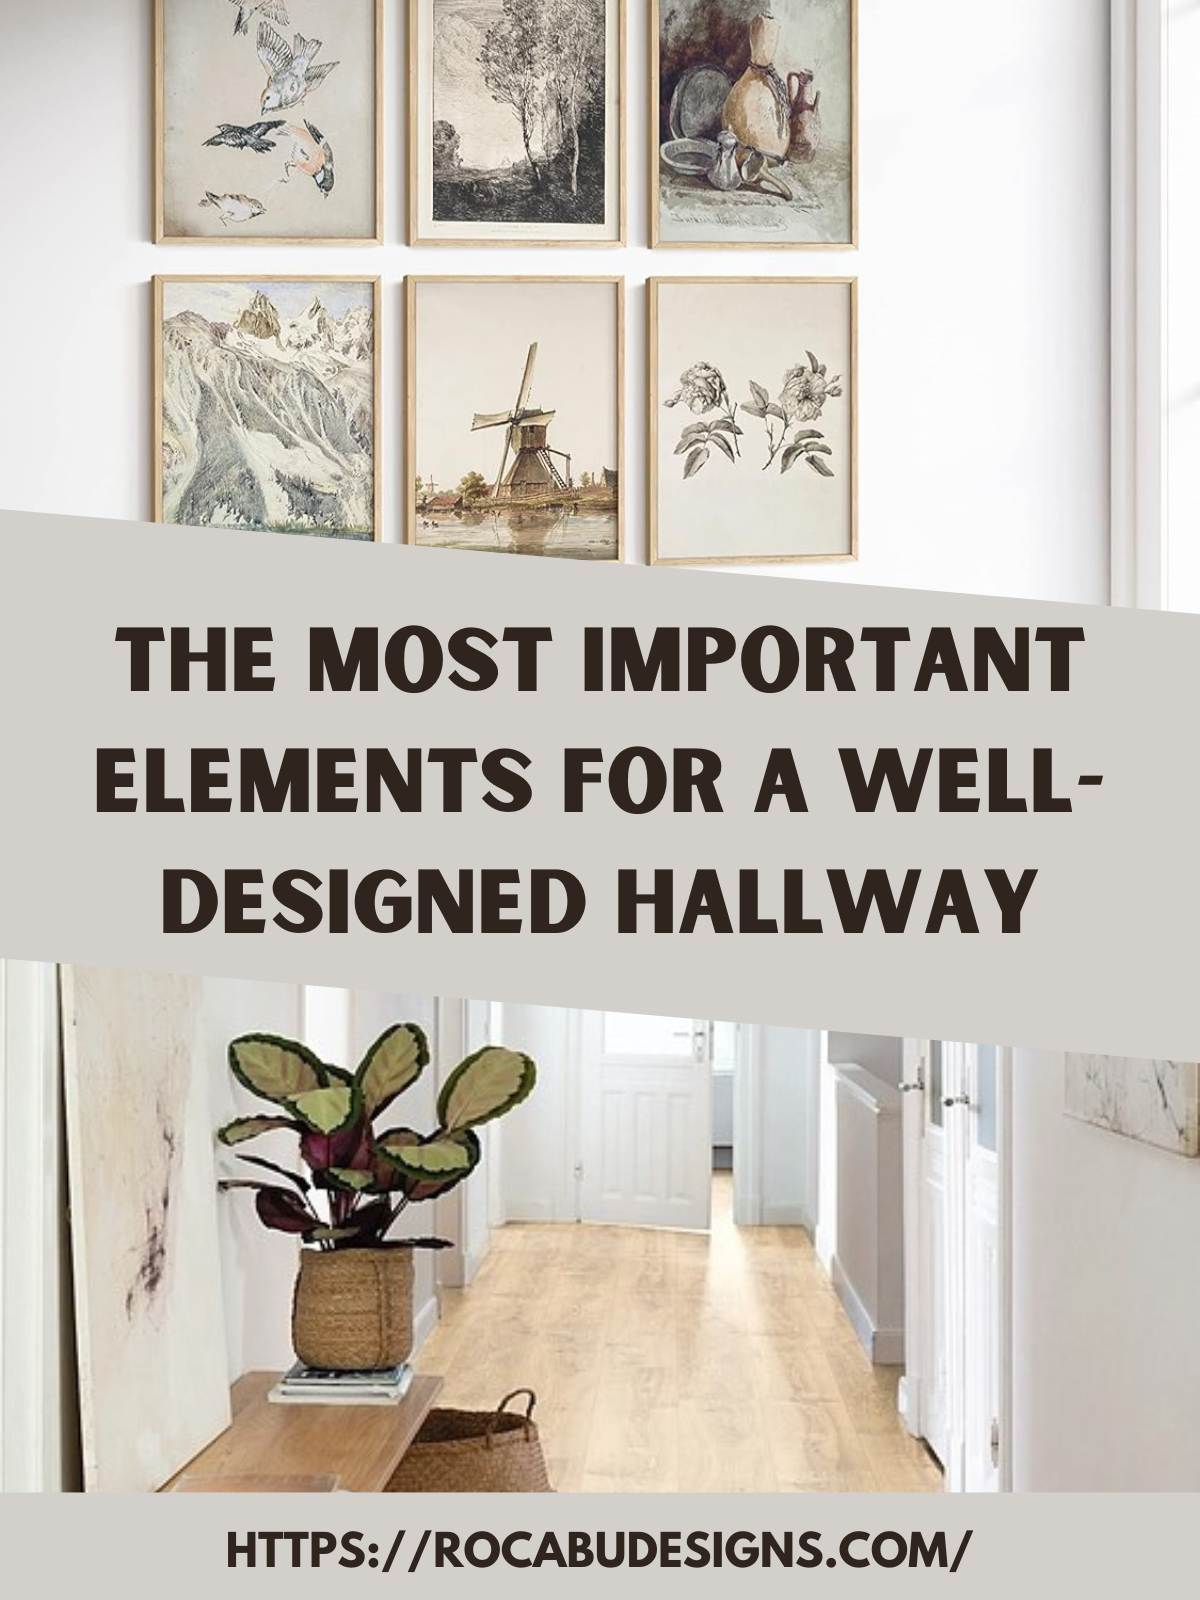 The Most Important Elements for a Well-Designed Hallway